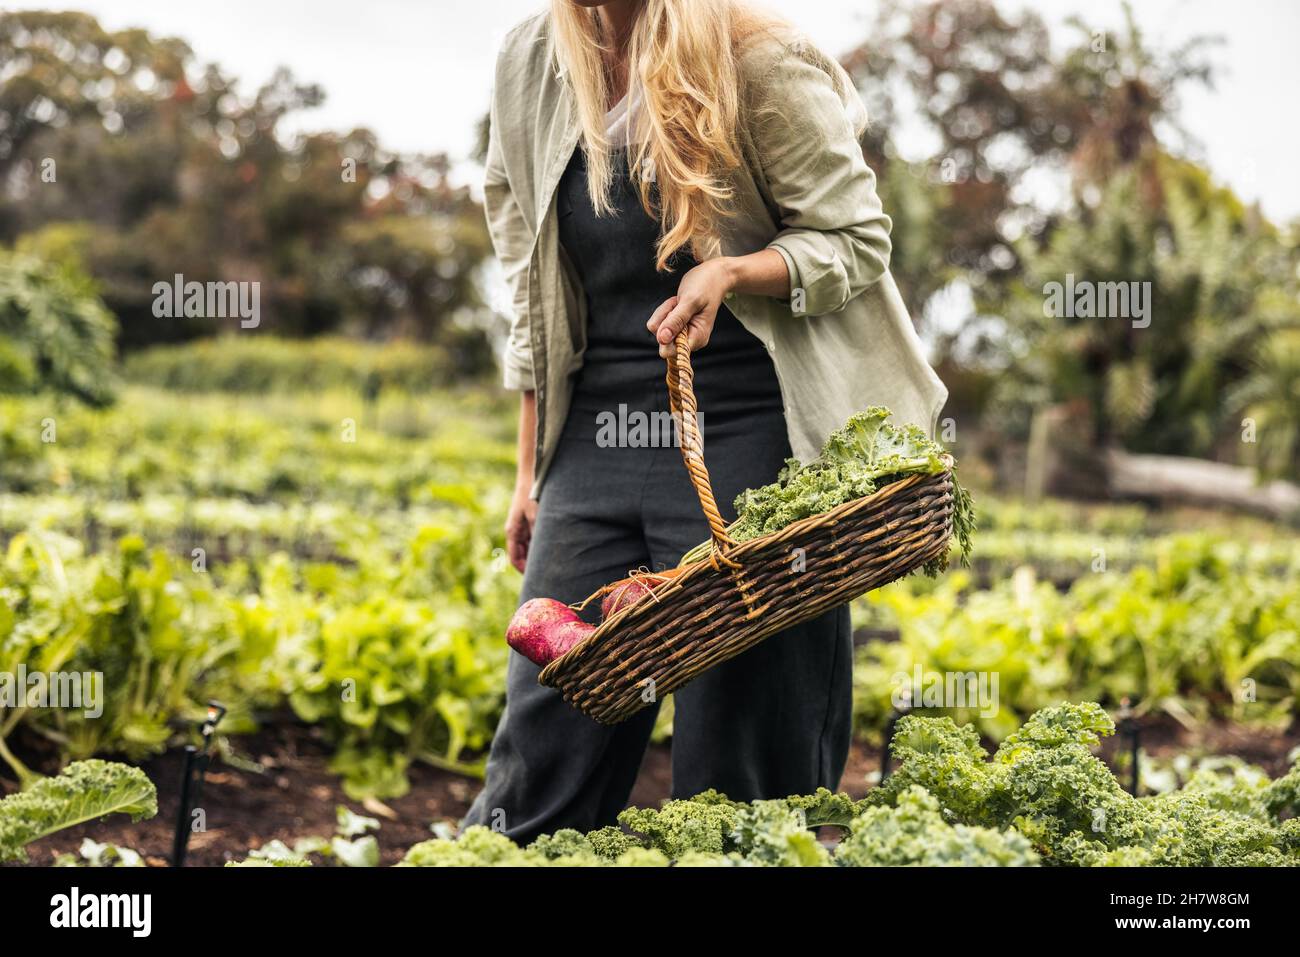 Anonymous female gardener gathering fresh vegetables. Unrecognizable young woman holding a basket full of fresh produce in an organic garden. Self-sus Stock Photo